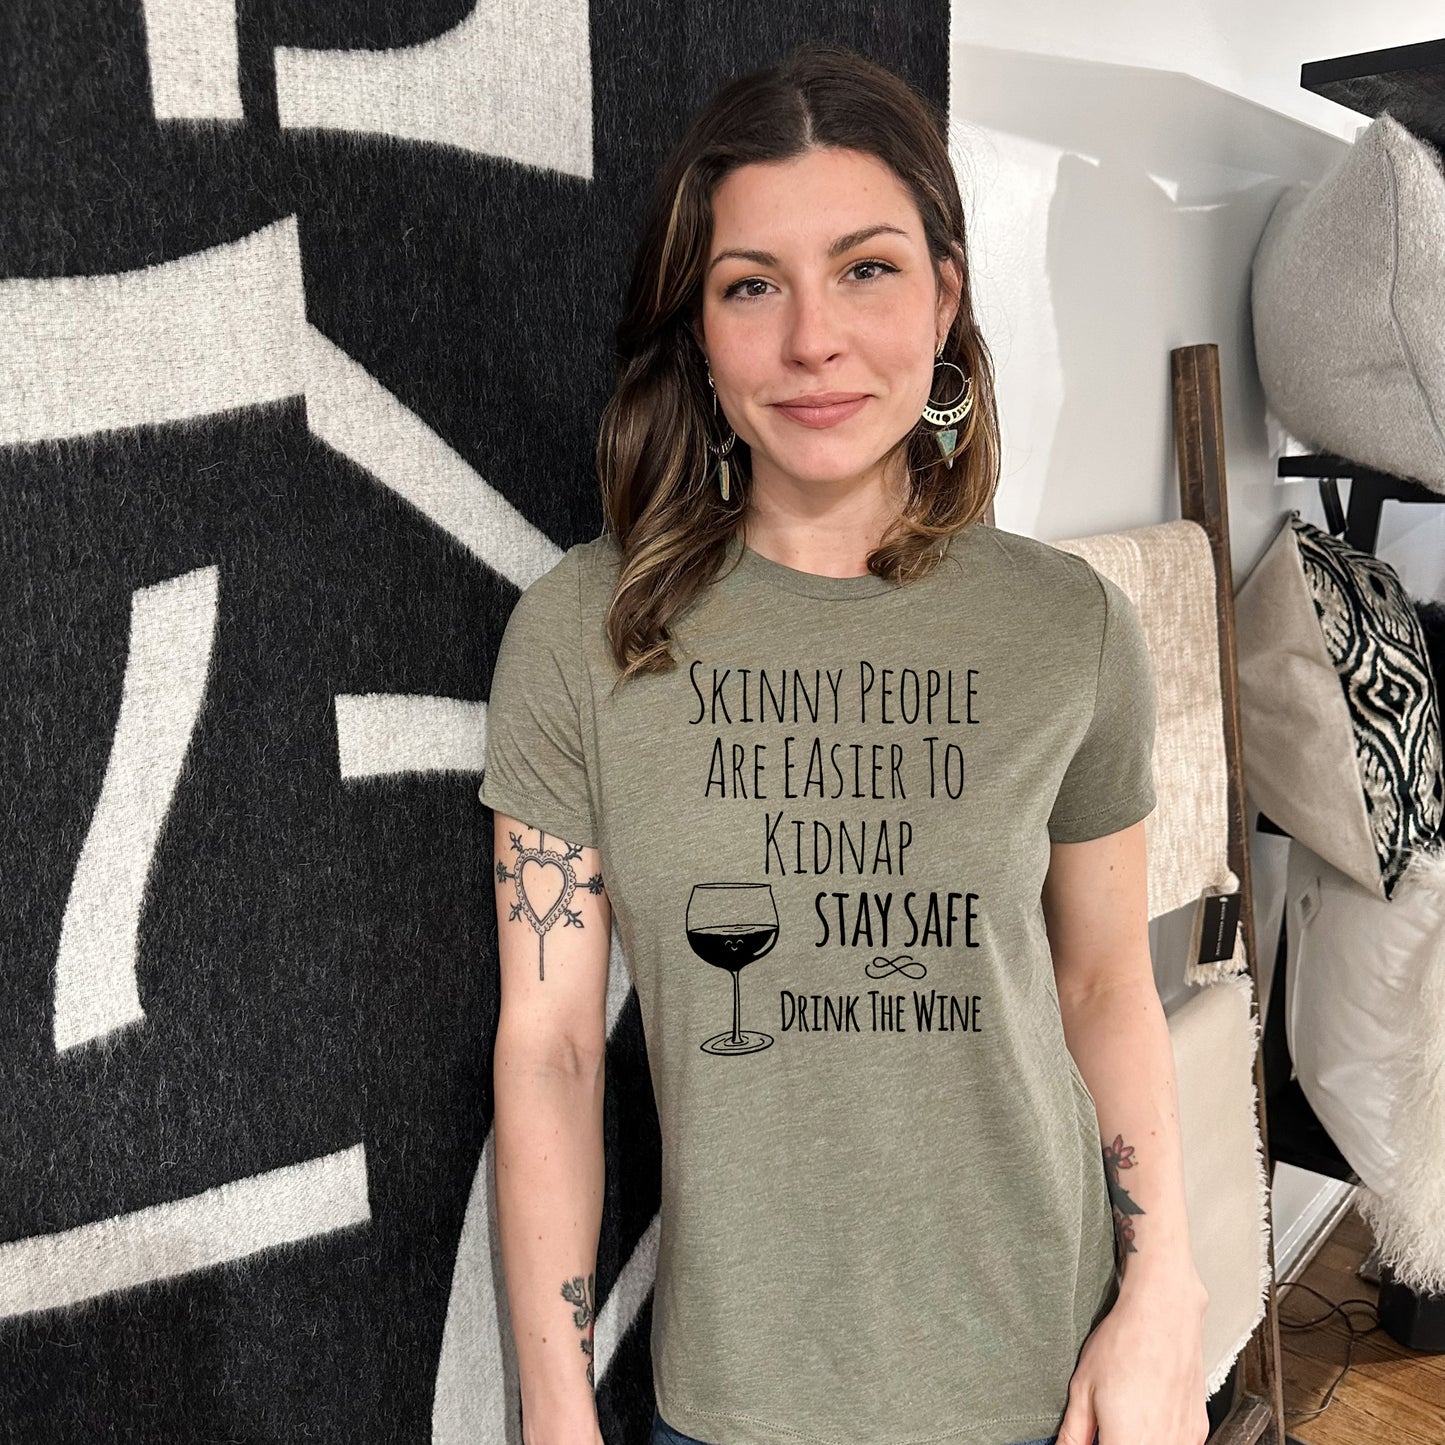 Skinny People Are Easier To Kidnap. Stay Safe. Drink The Wine - Women's Crew Tee - Olive or Dusty Blue